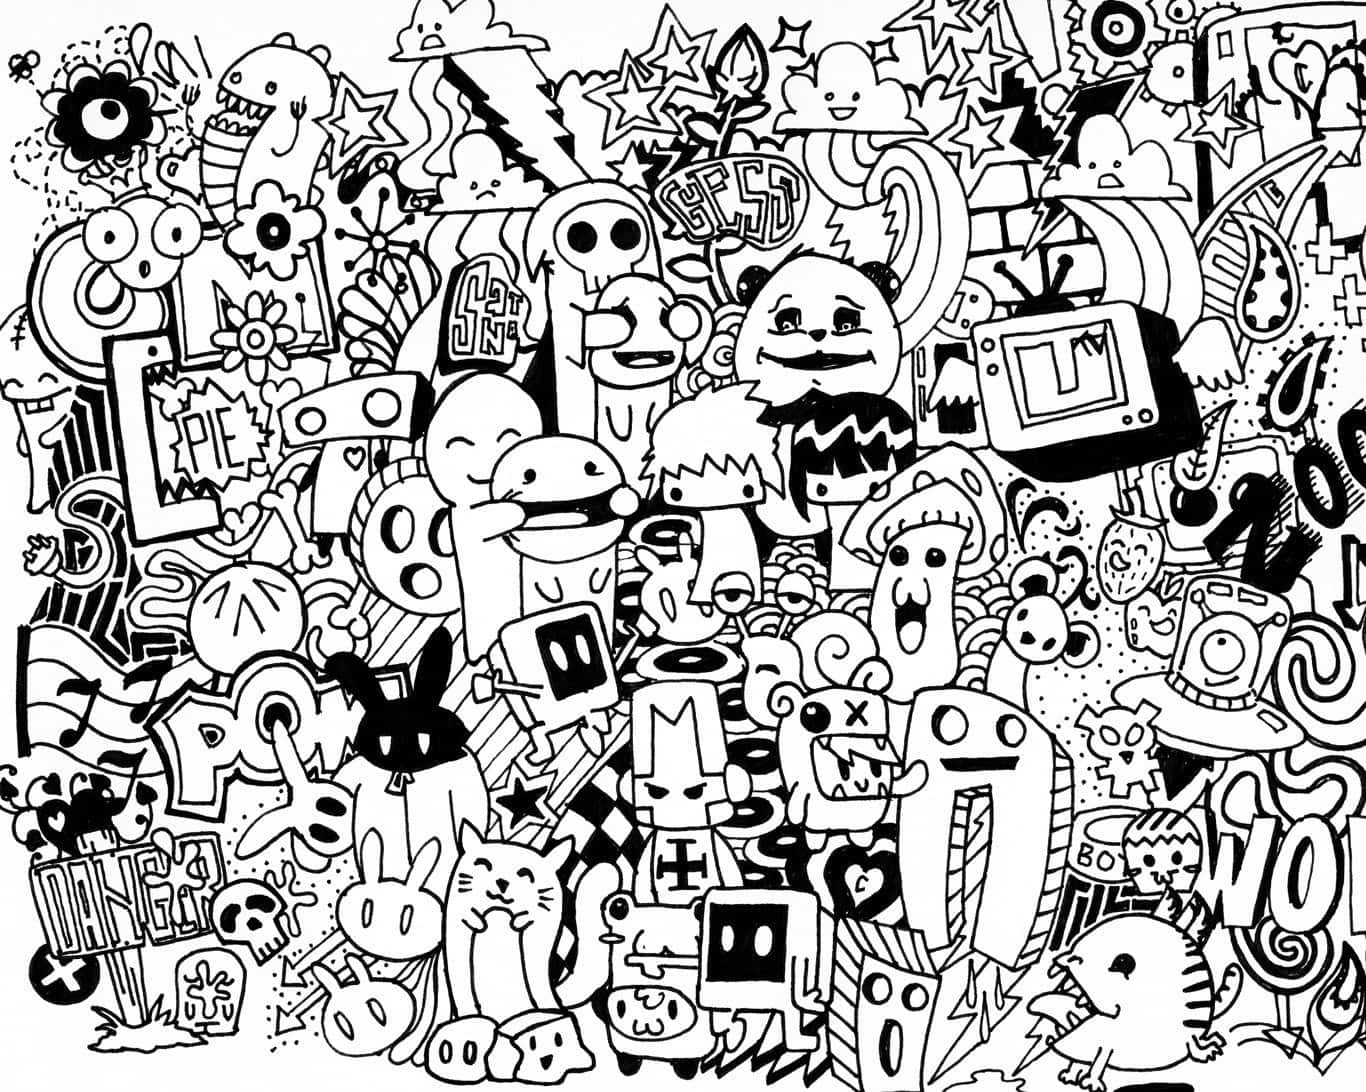 Get creative with doodling!